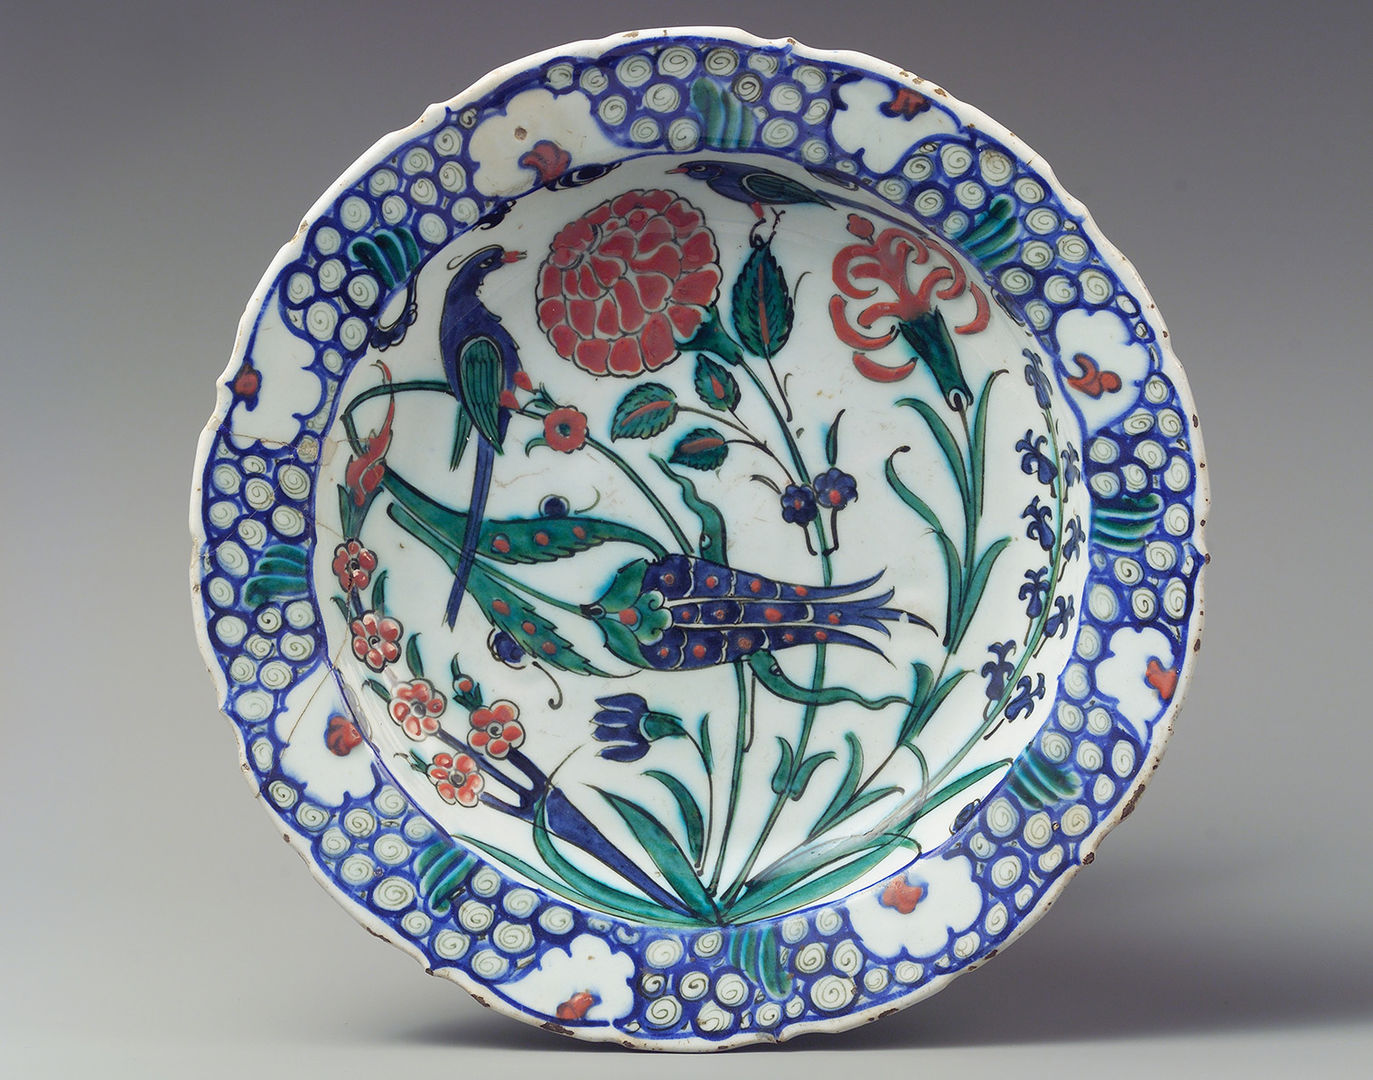 An upright round ceramic plate painted with images of flowers, some bent with red rose buds and some leaning in from the side with a purple tulip head.